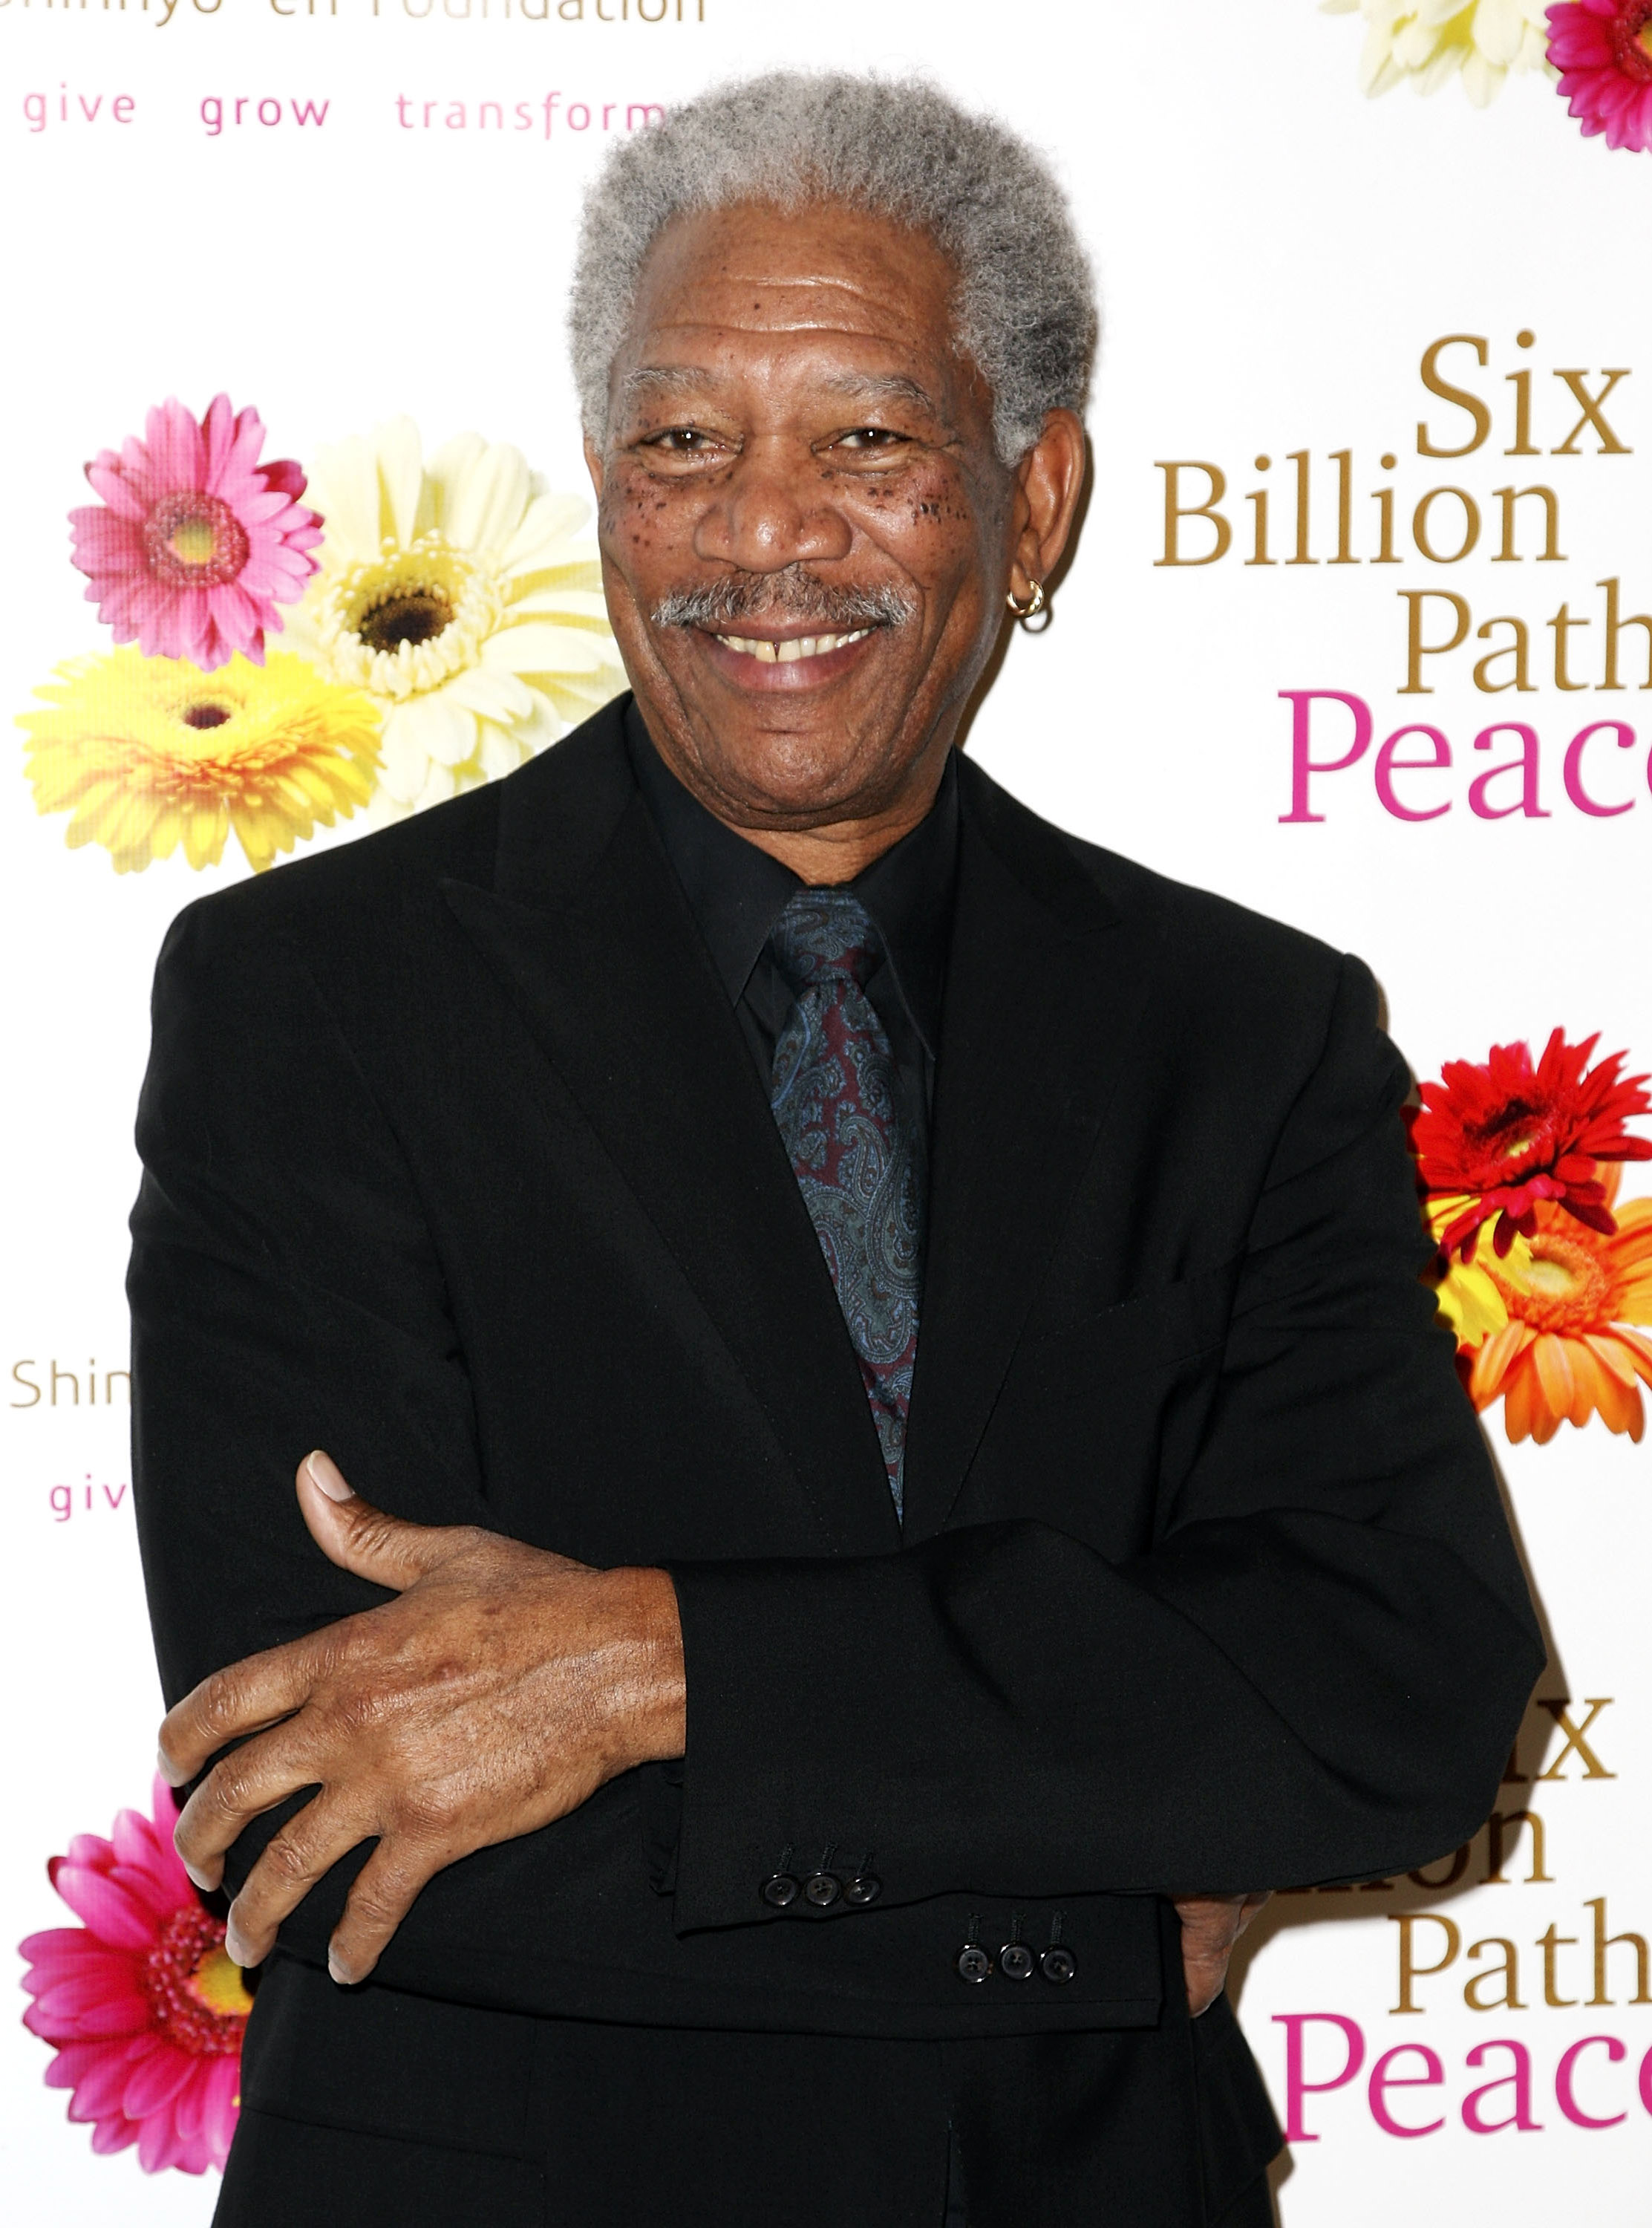 Morgan Freeman at the second annual "Pathfinders to Peace" Gala at Cipriani 42nd Street on March 20, 2008 in New York City | Source: Getty Images